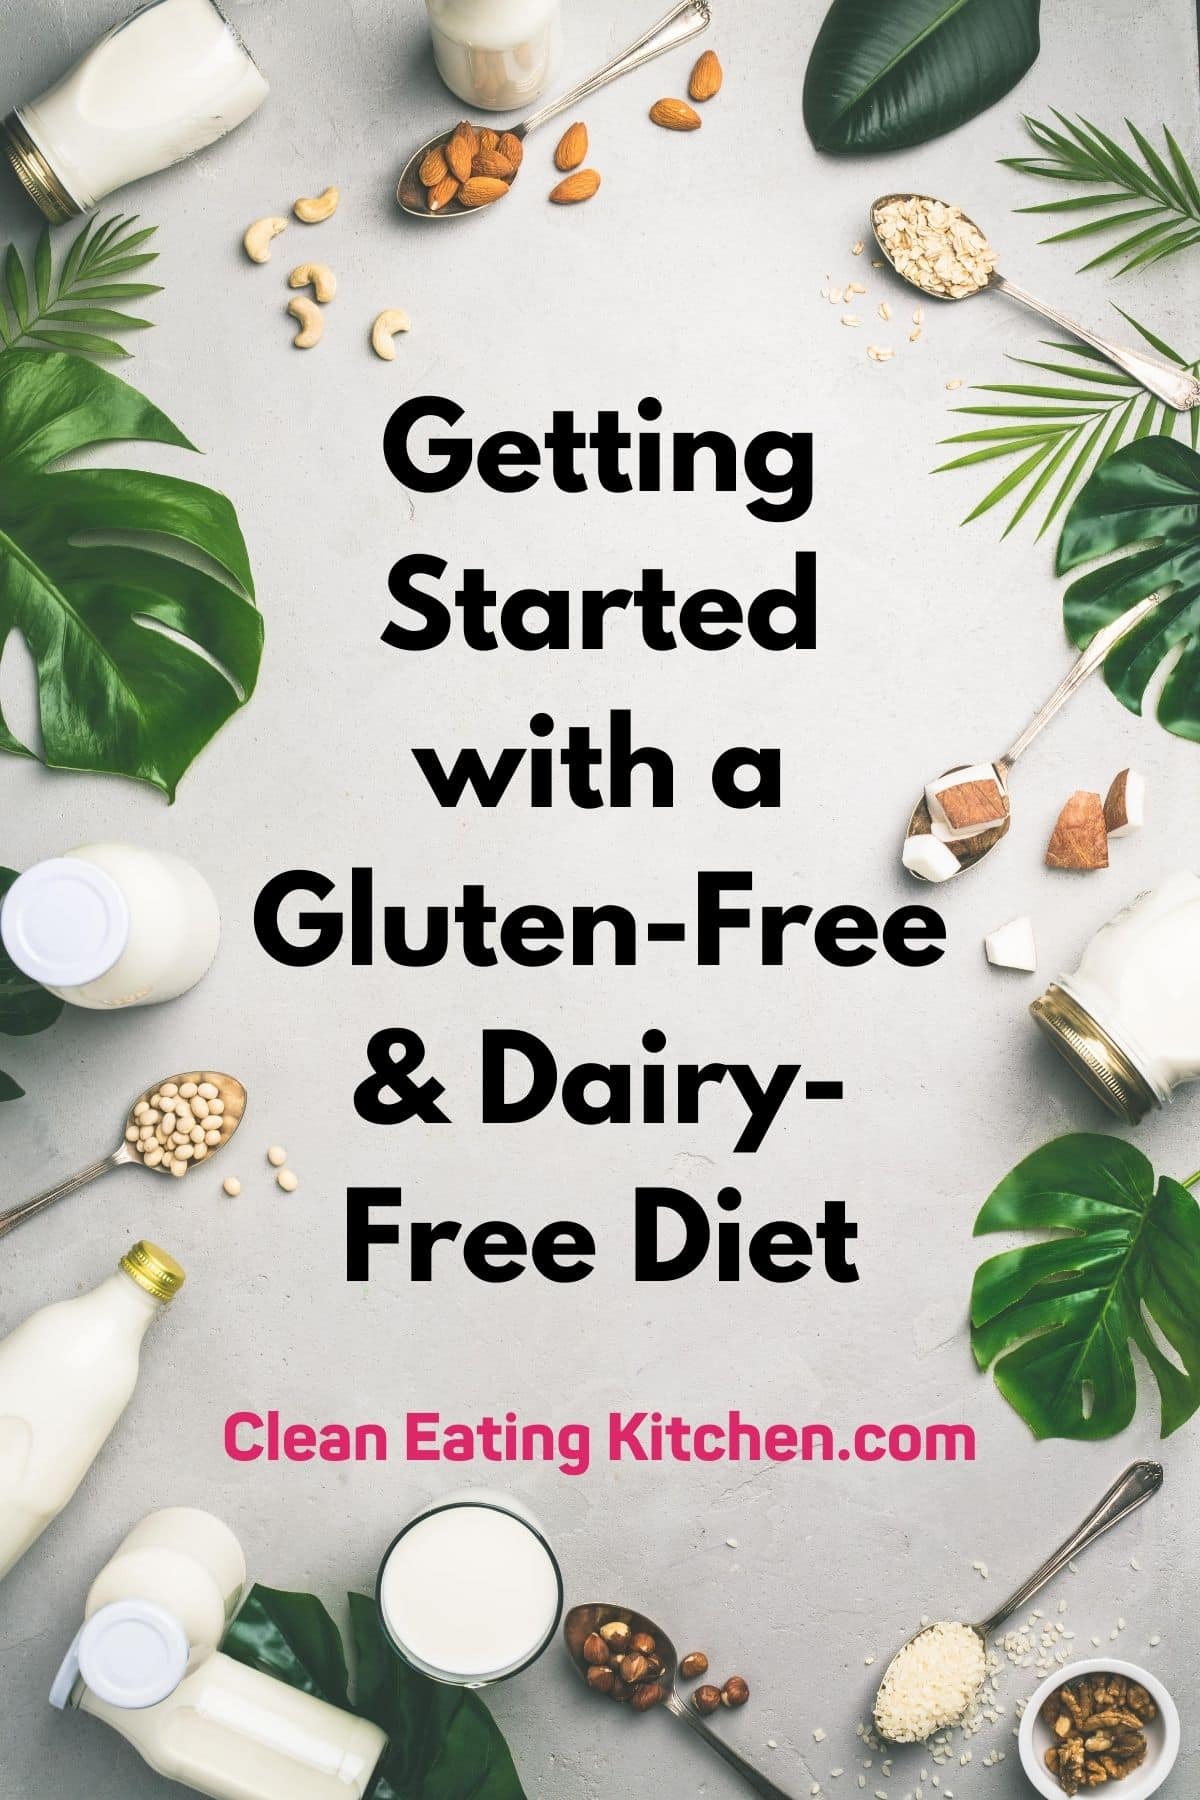 infographic with tips for getting started with a gluten-free and dairy-free diet